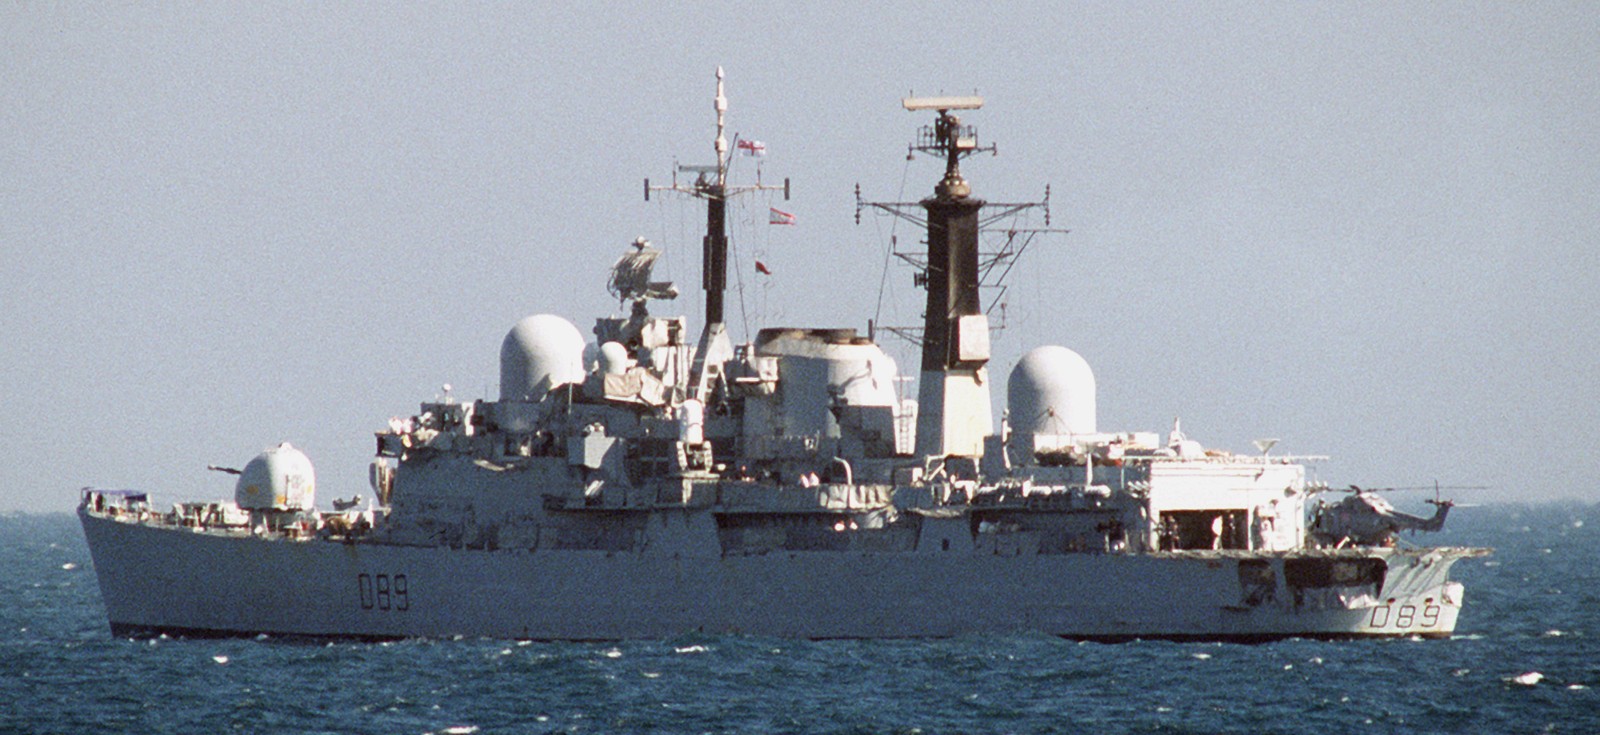 d 89 hms exeter type 42 sheffield class destroyer royal navy